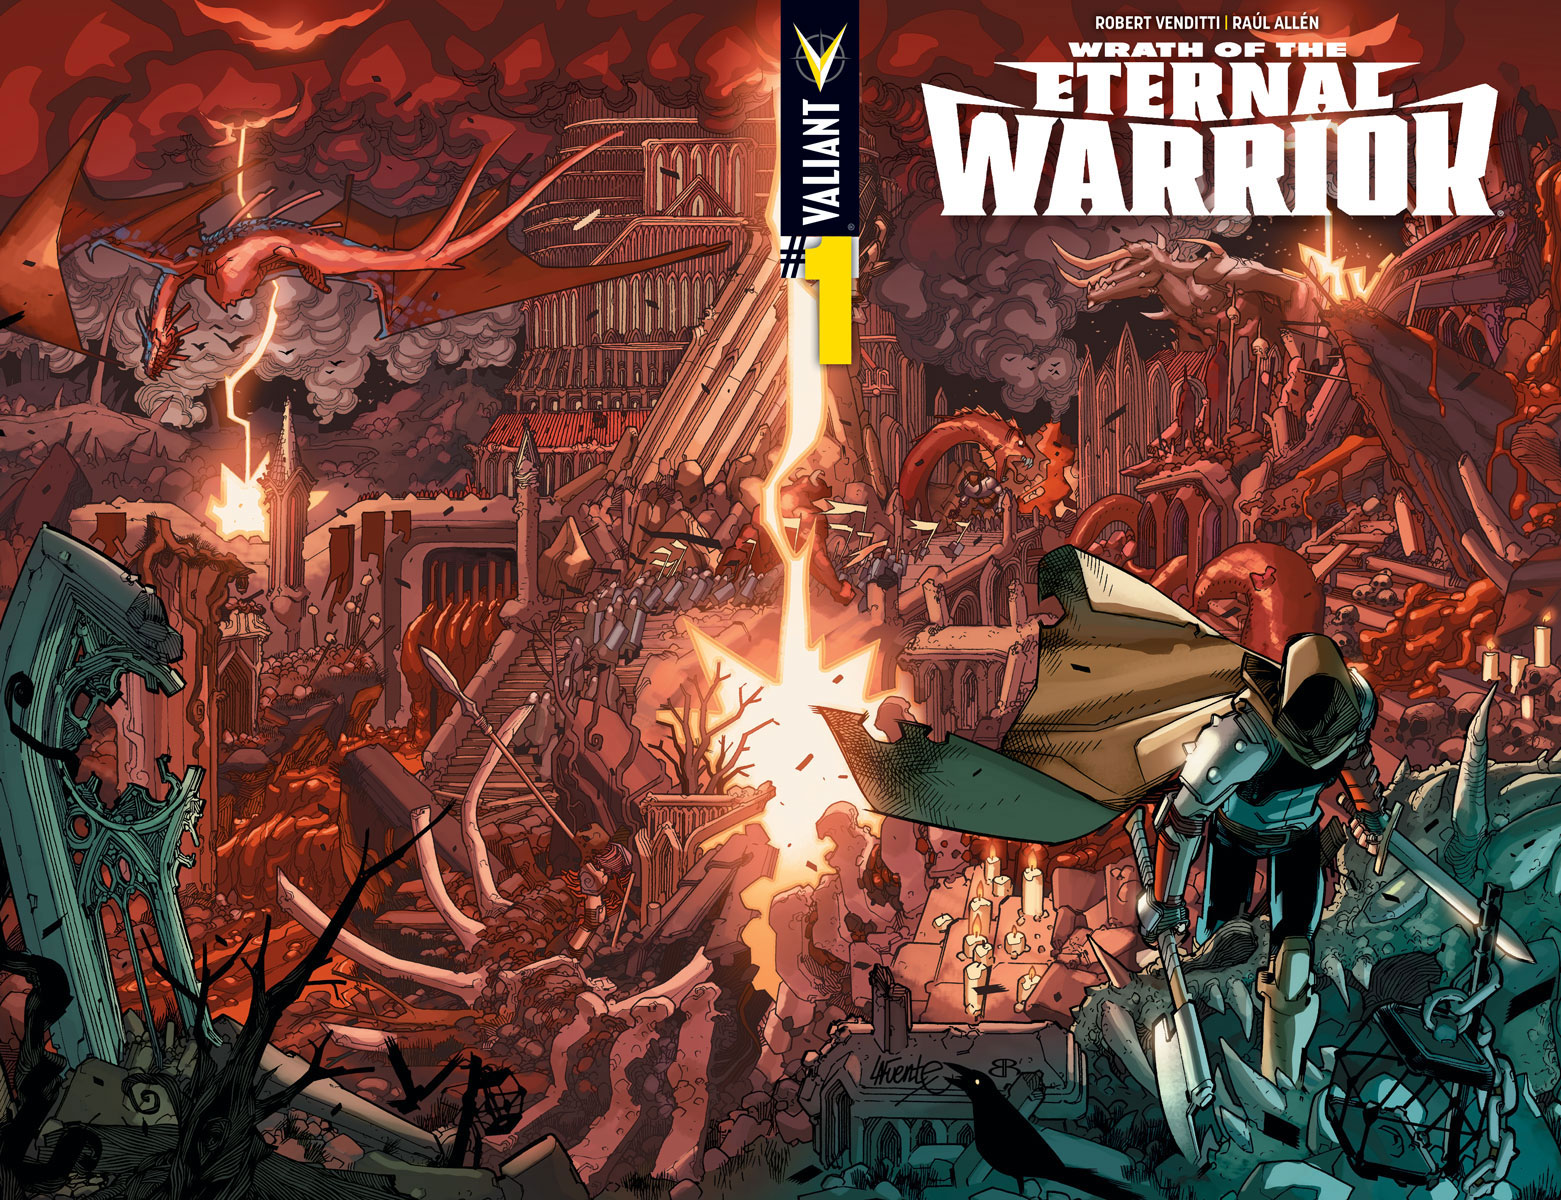 Valiant Release Complete Covers for Wrath of the Eternal Warrior #1